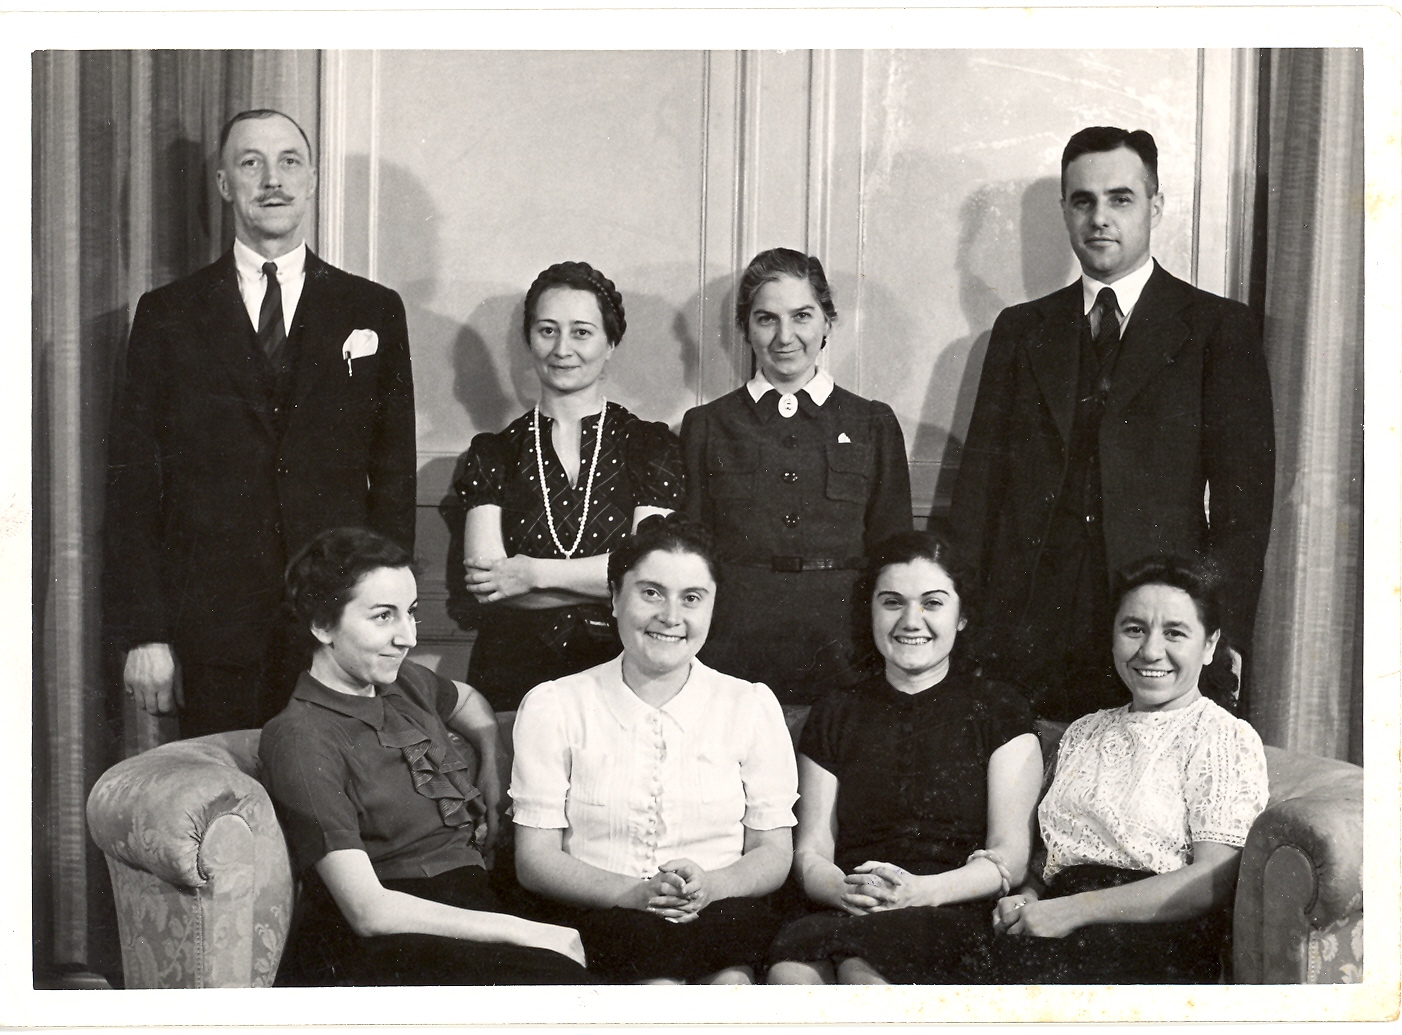 Nicholas Artamonoff (back, far right) with other members of the faculty and staff of Robert College.